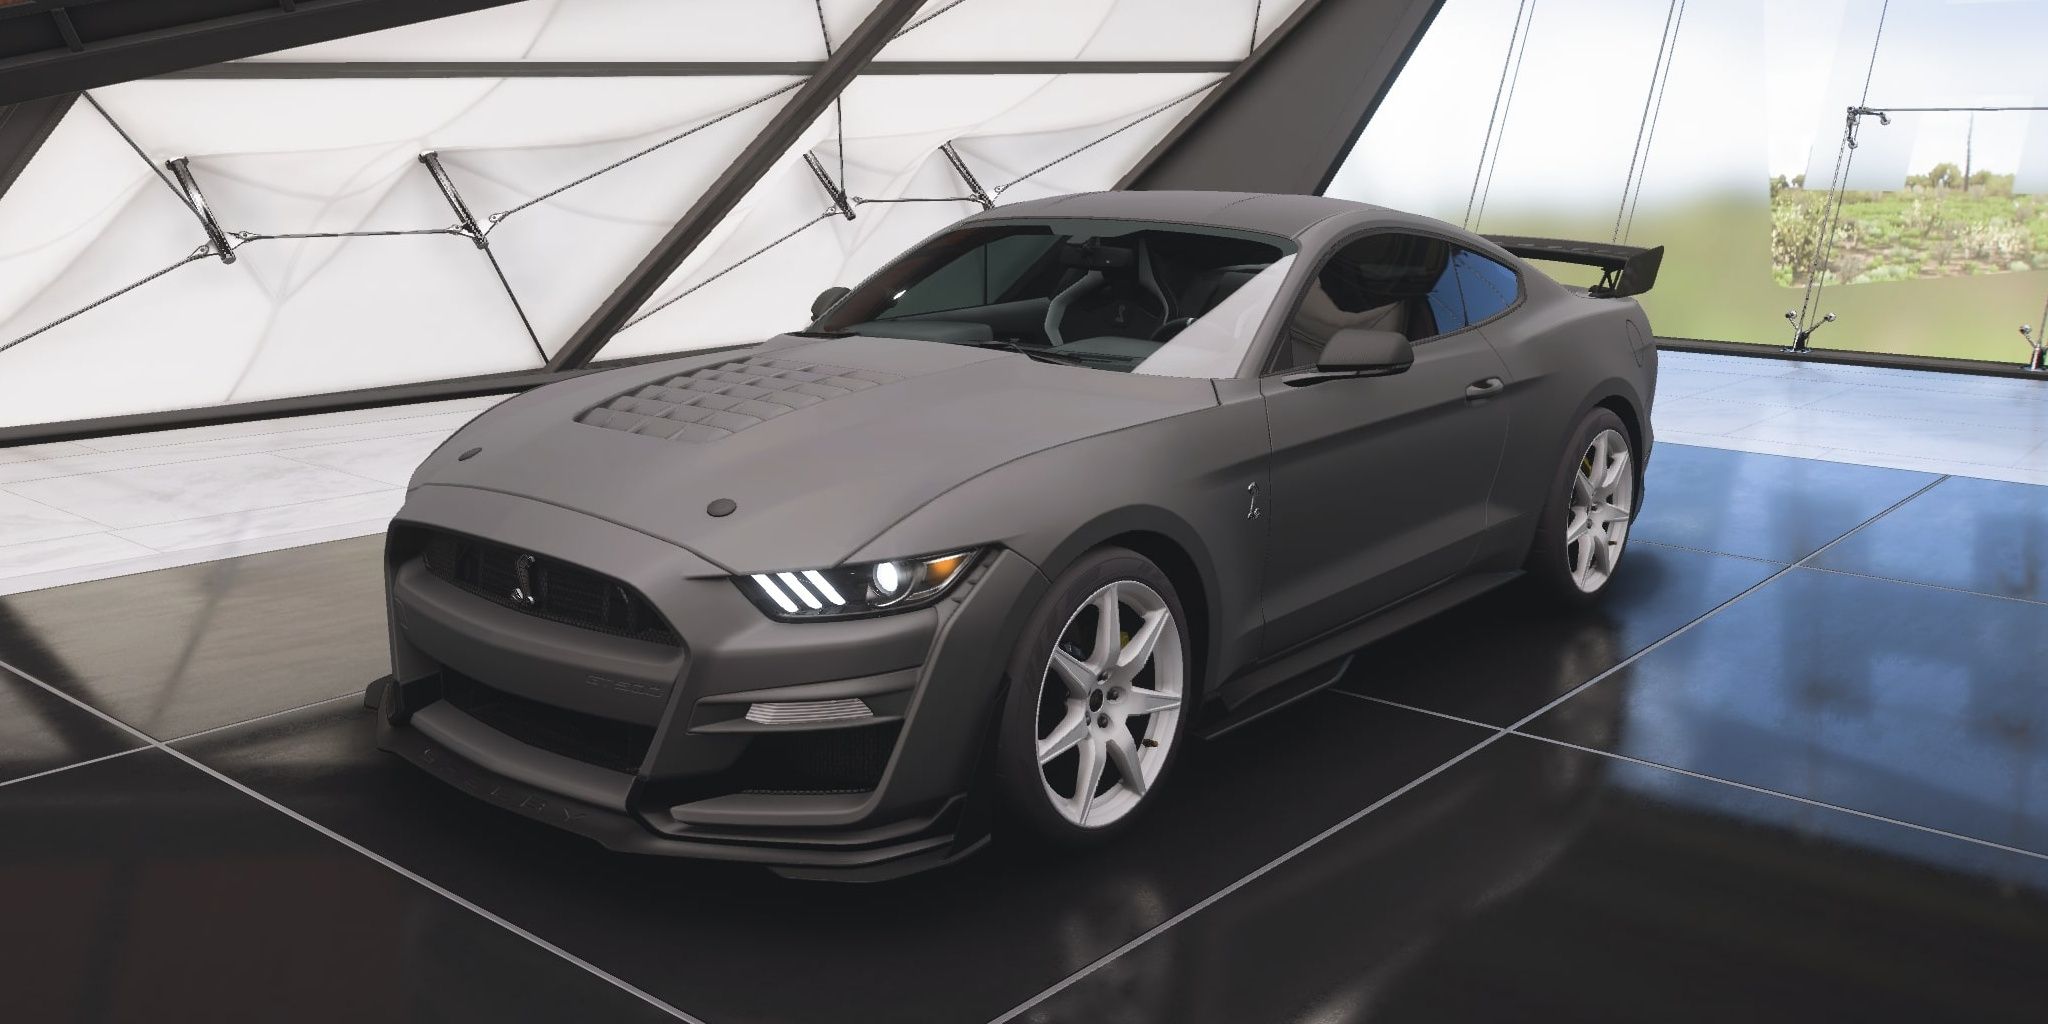 2020 Ford Mustang Shelby GT500 in Forza Horizon 5